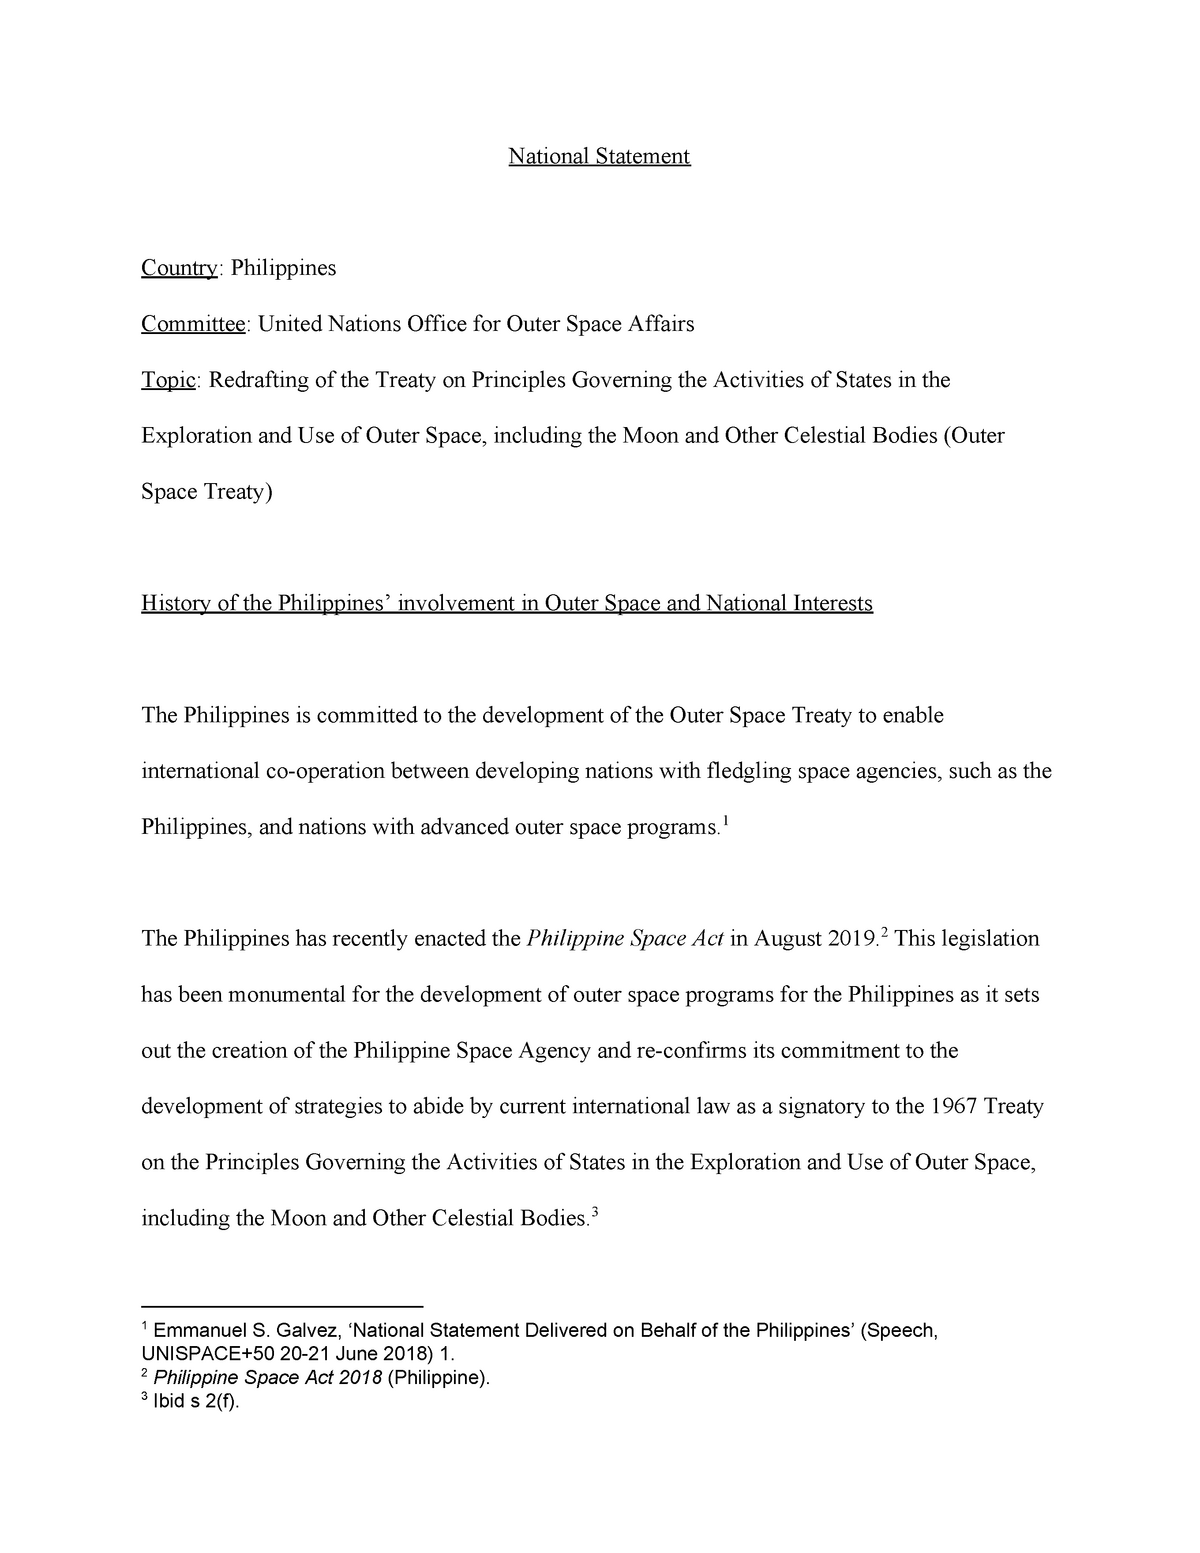 national-statement-national-statement-country-philippines-committee